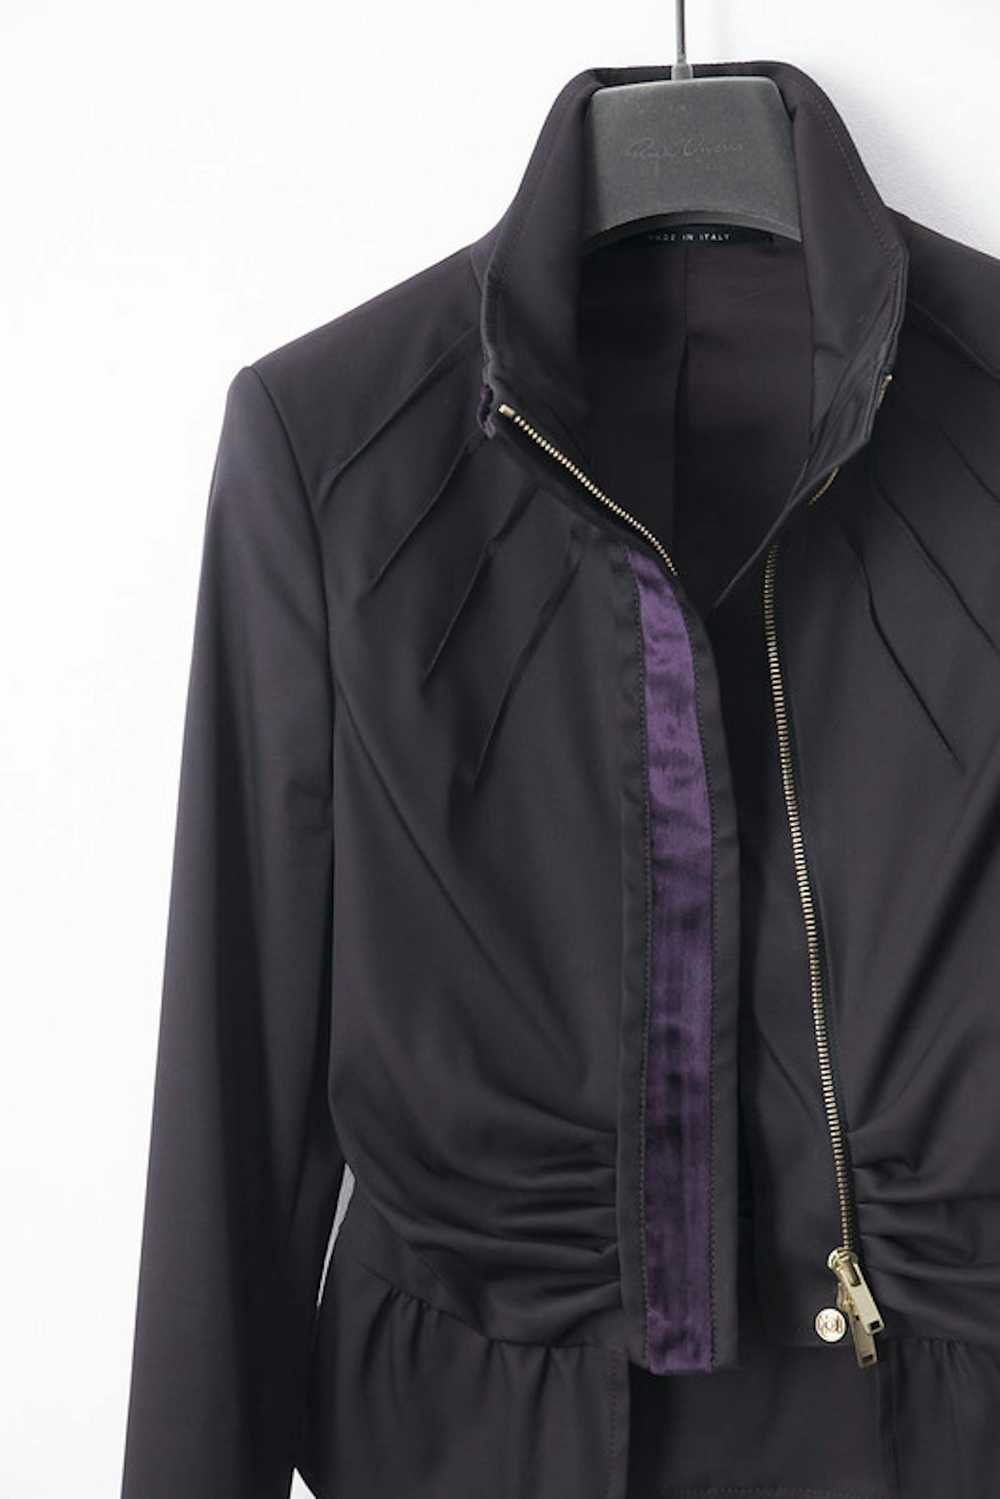 Gucci × Tom Ford AW04 iconic jacket - image 2